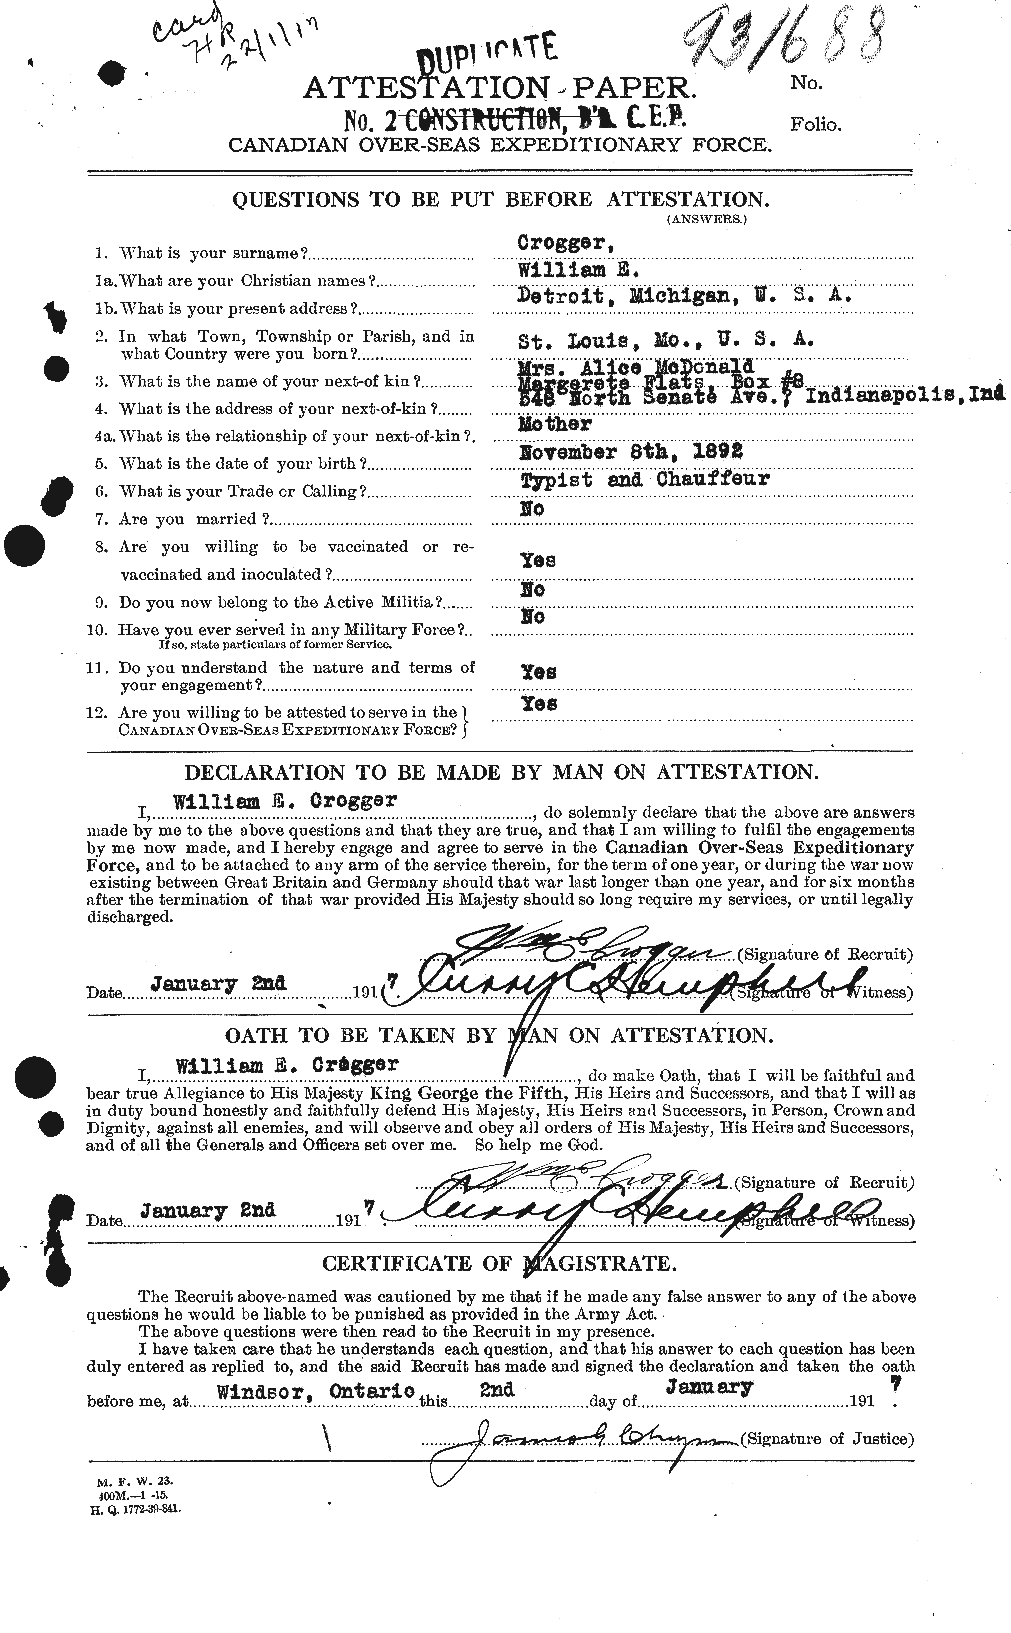 Personnel Records of the First World War - CEF 065849a